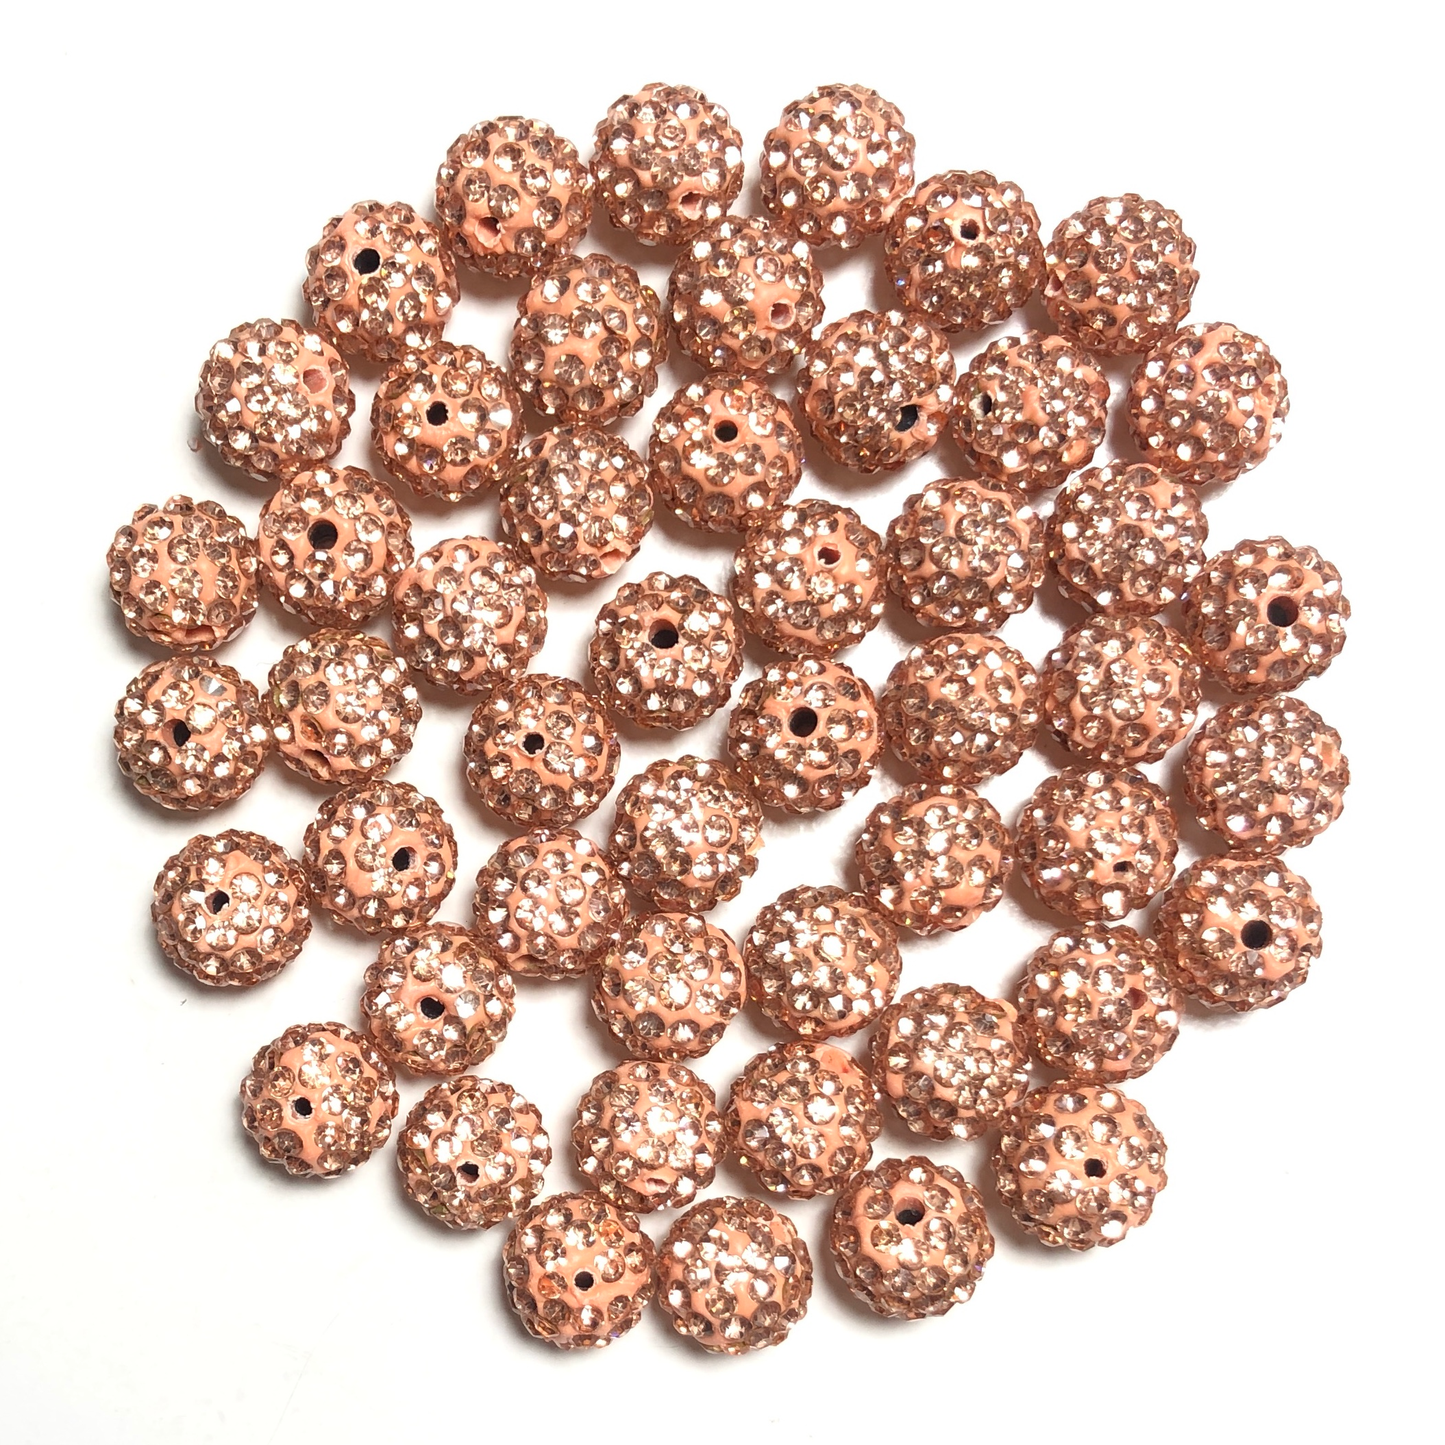 50-100pcs/lot 10mm Champagne Rhinestone Clay Disco Ball Beads Clay Beads Charms Beads Beyond